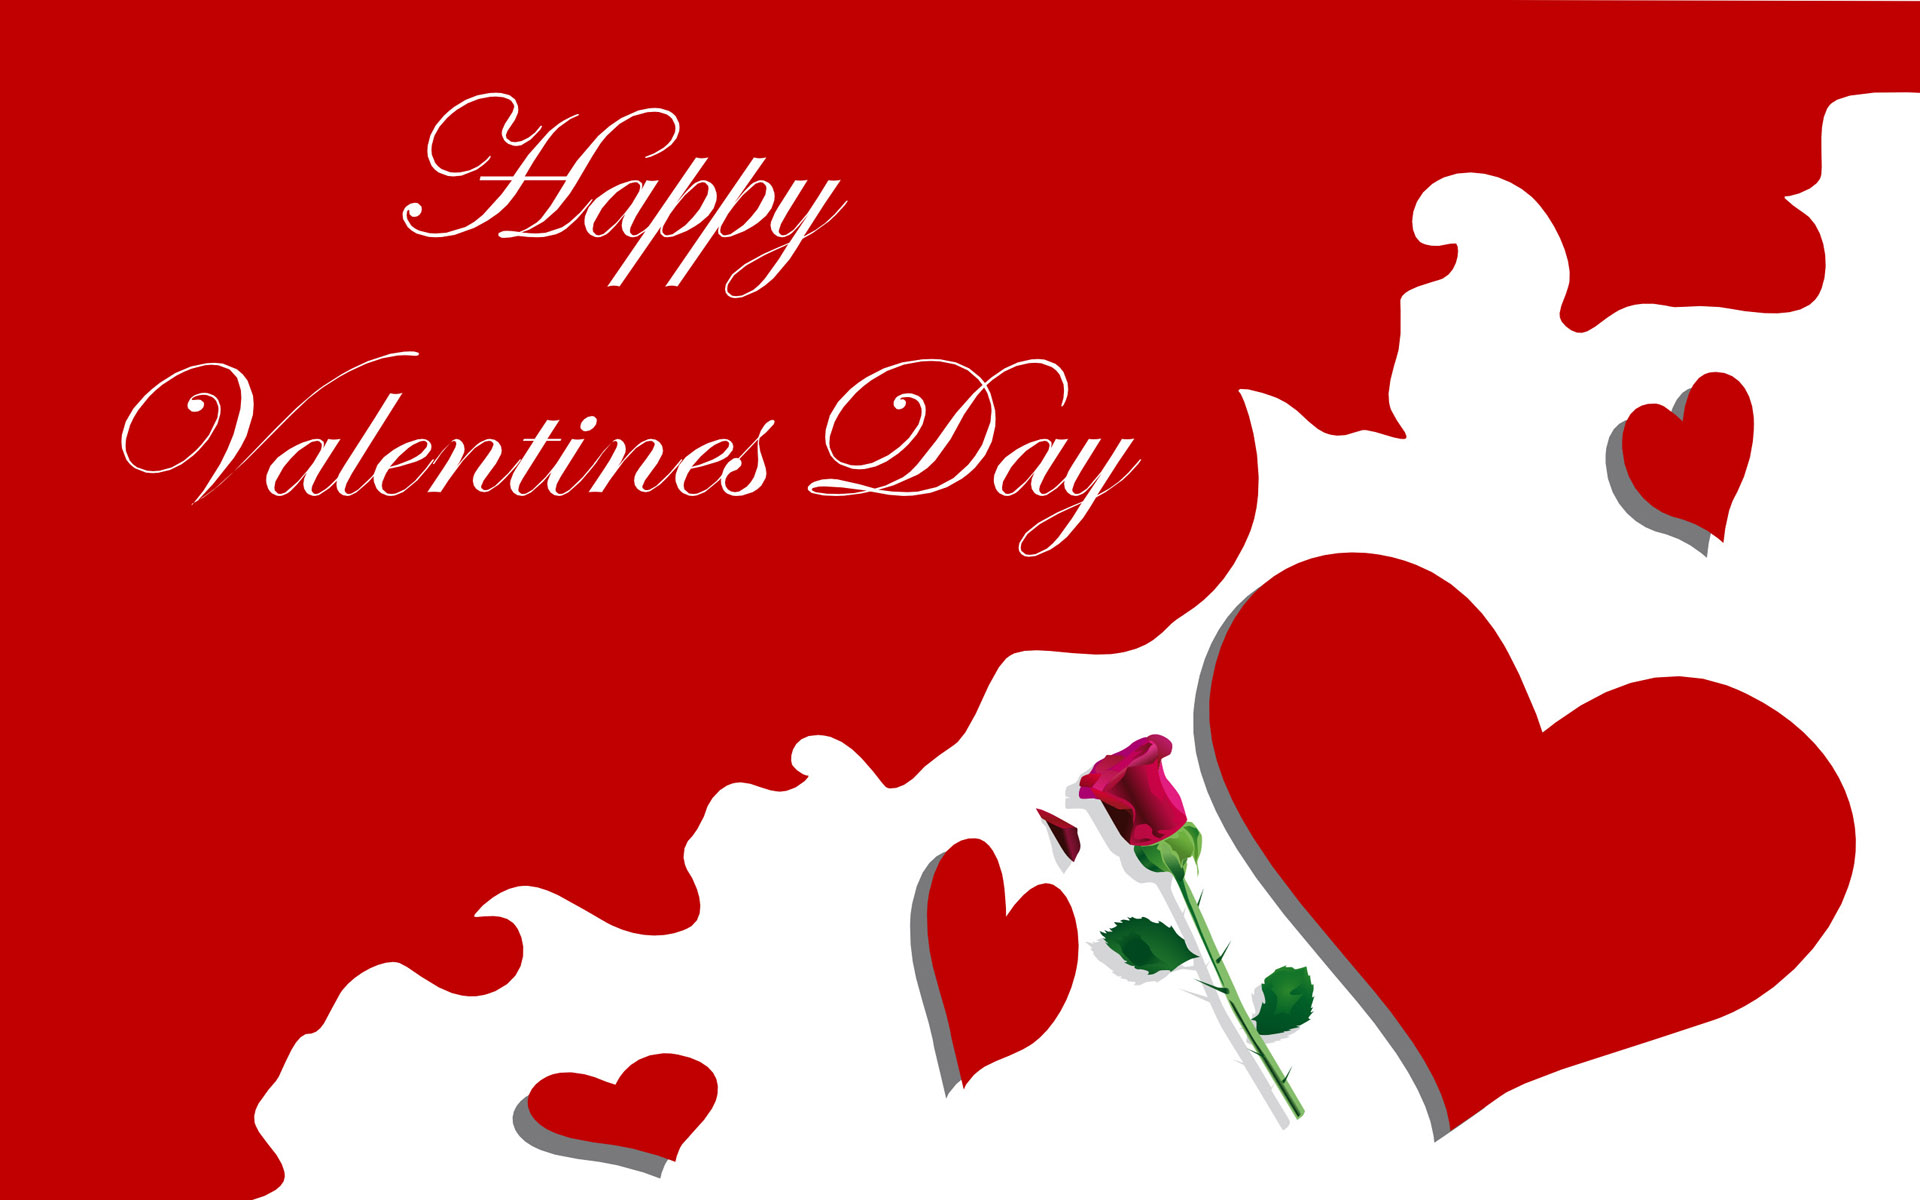 Valentines-Day-2015-Greeting-Cards-1